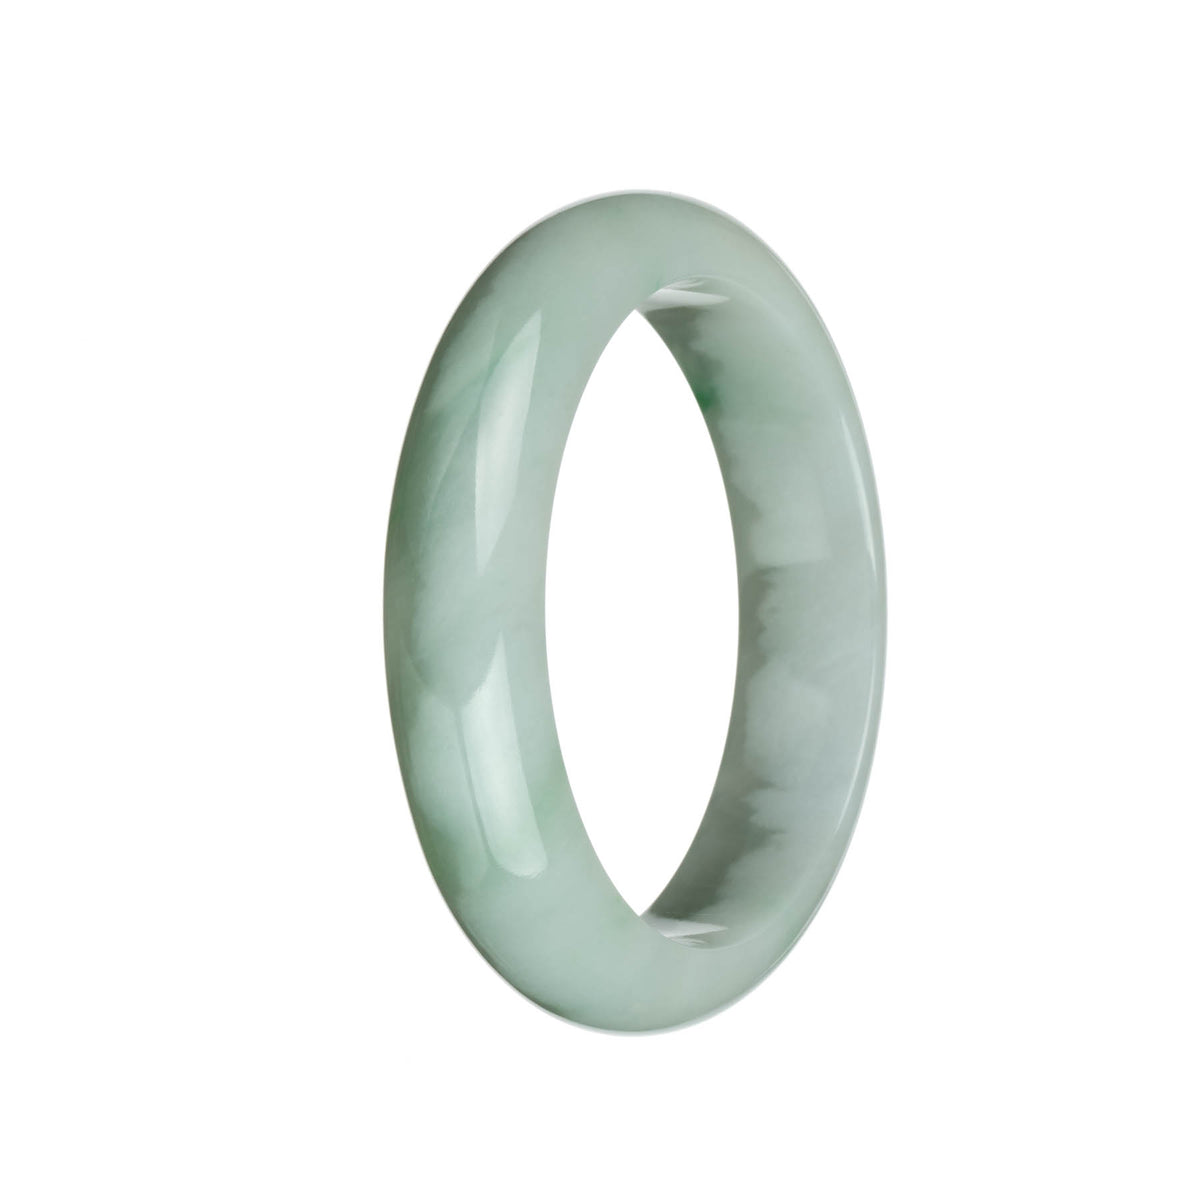 Real Grade A Green and White with Emerald Green Patterns Jadeite Jade Bangle - 63mm Half Moon